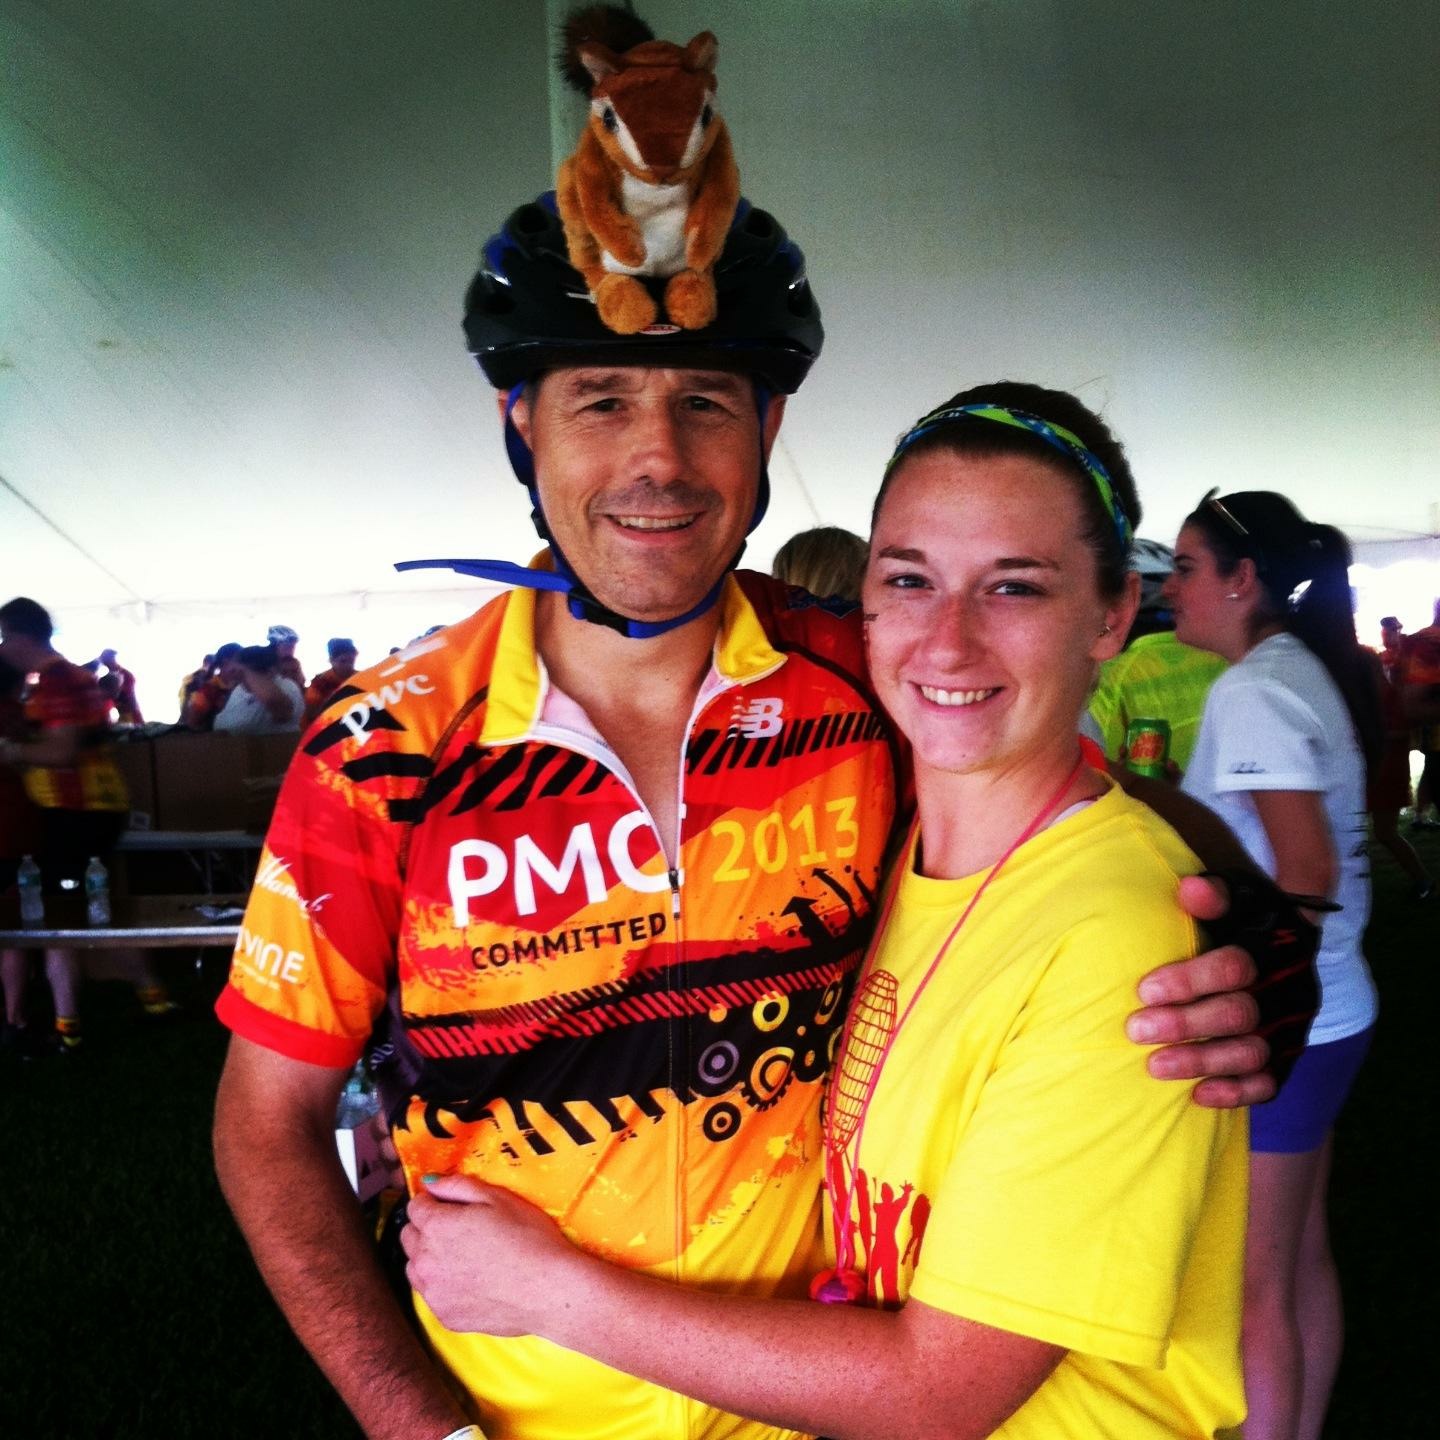 PHOTO: Peter and Jessica Otto at the 2013 Pan-Mass Challenge. 